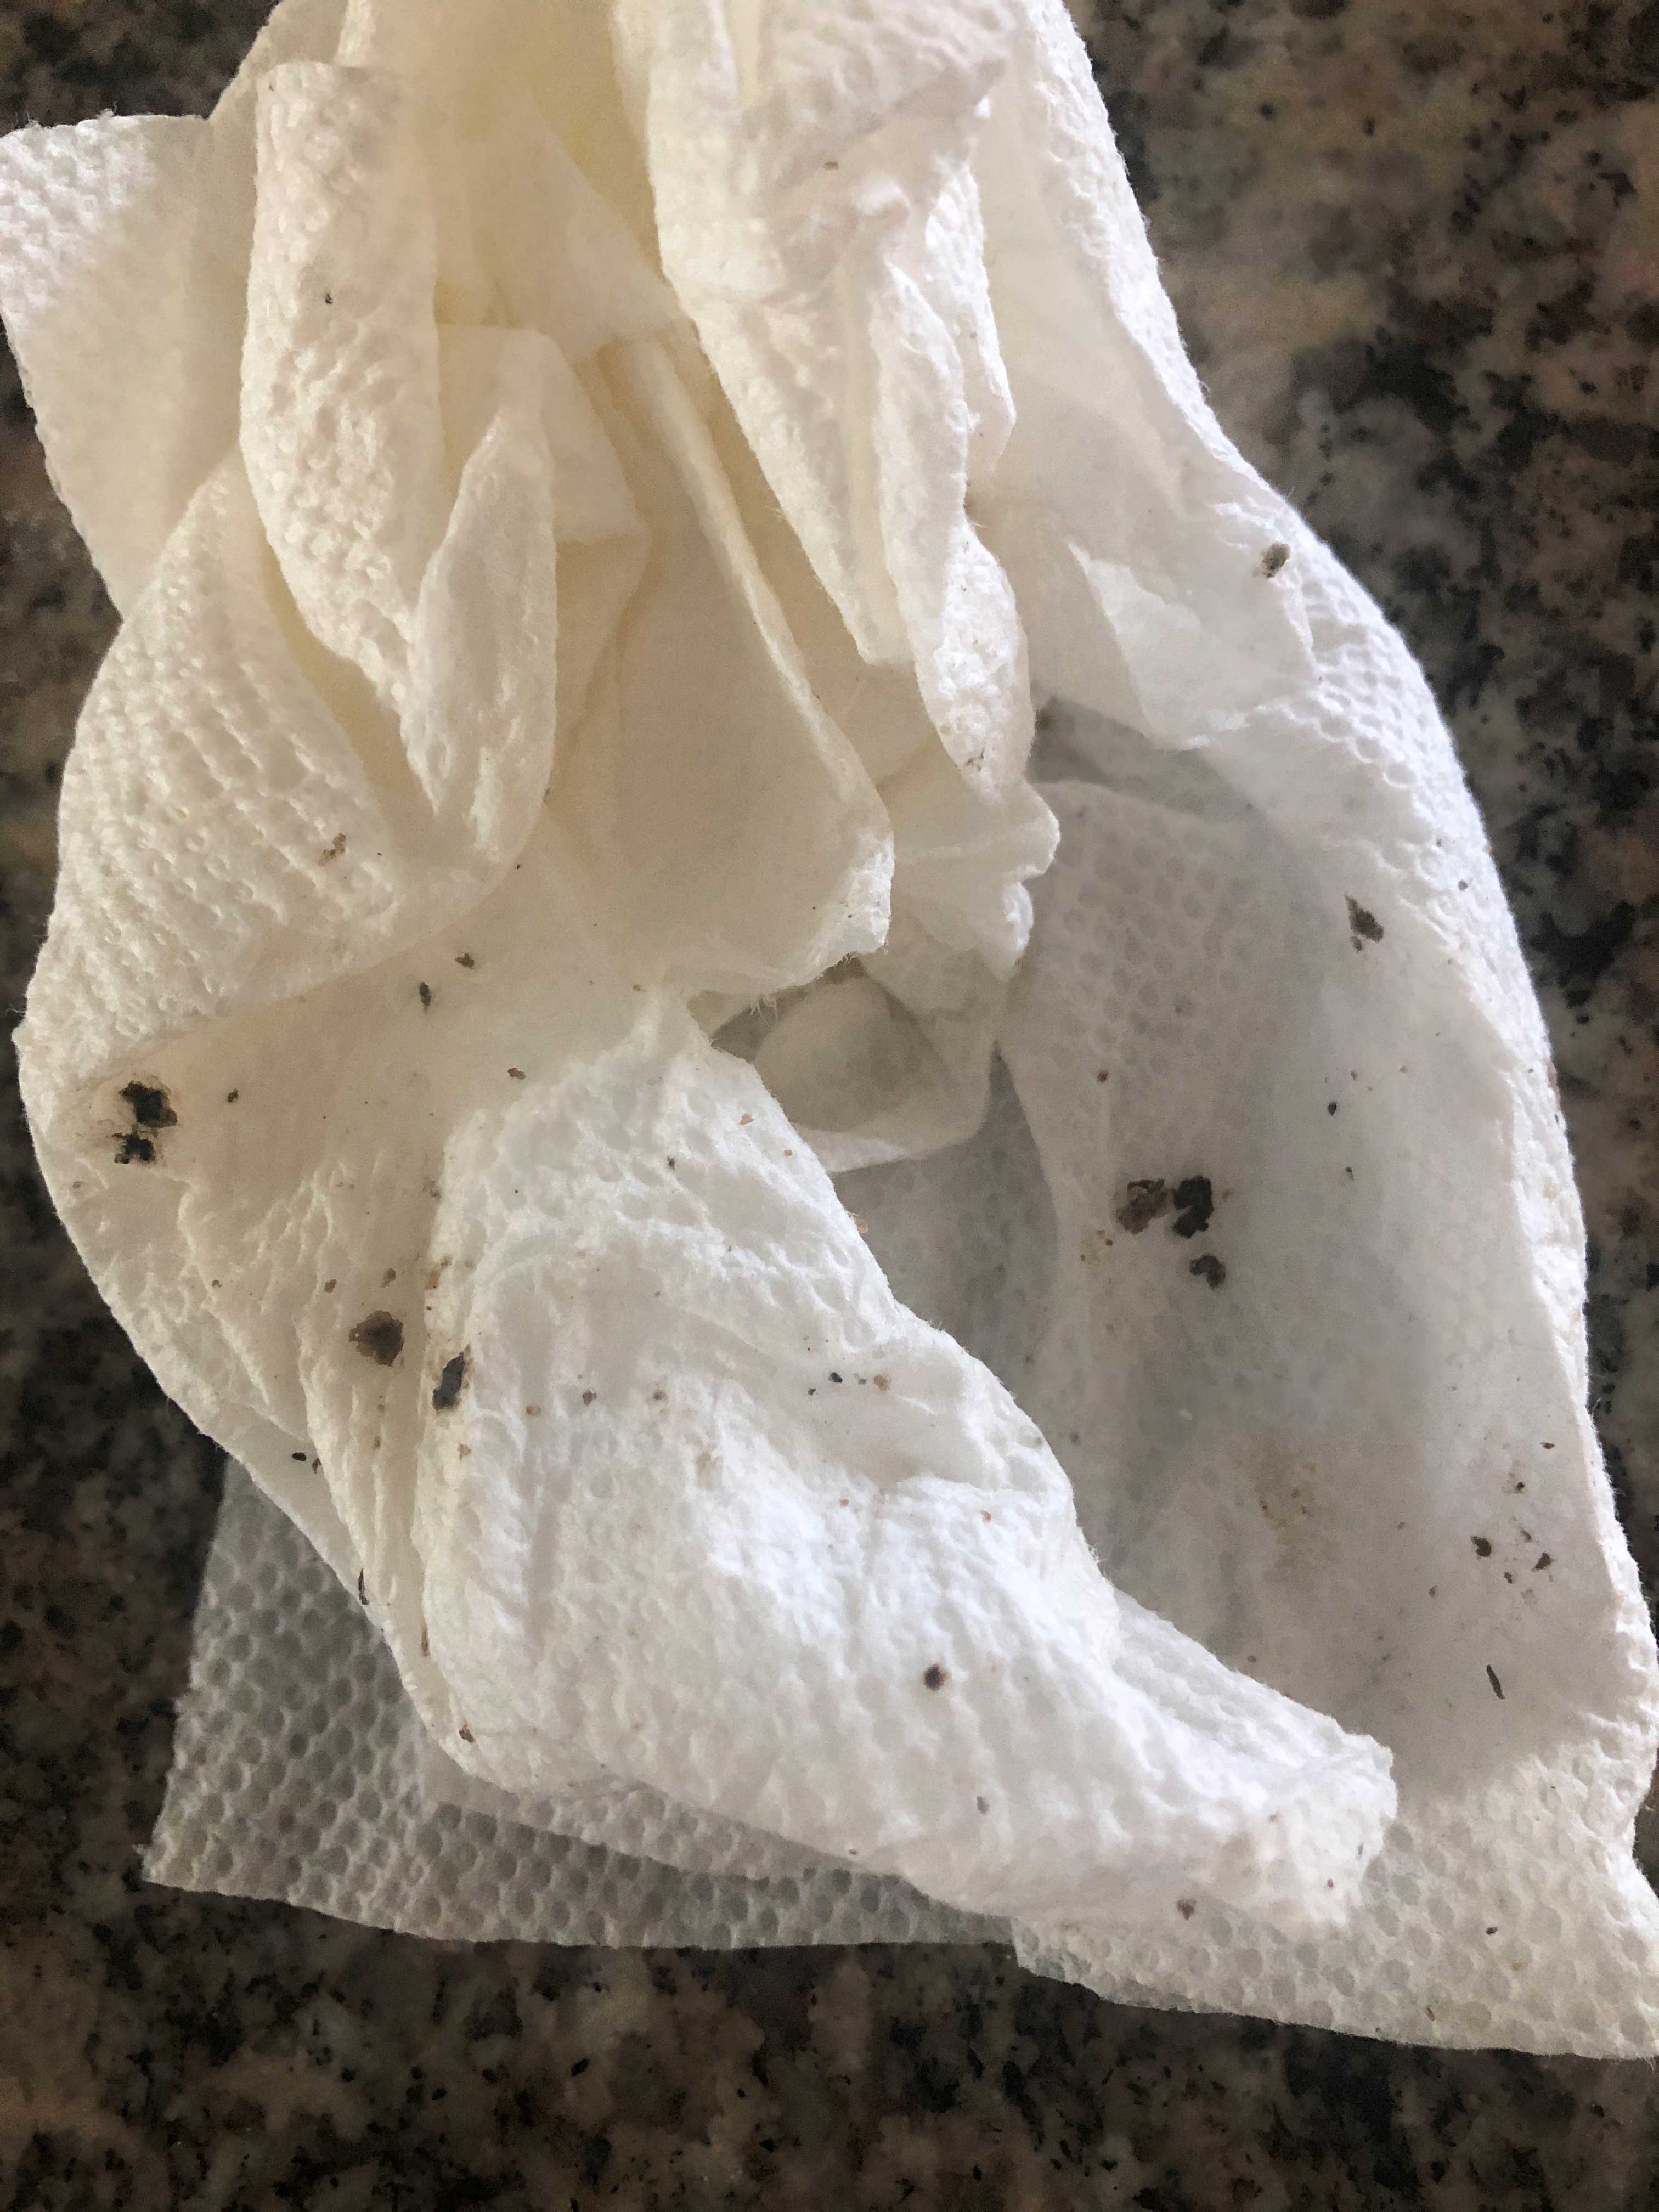 Mold on a rag from wash-late